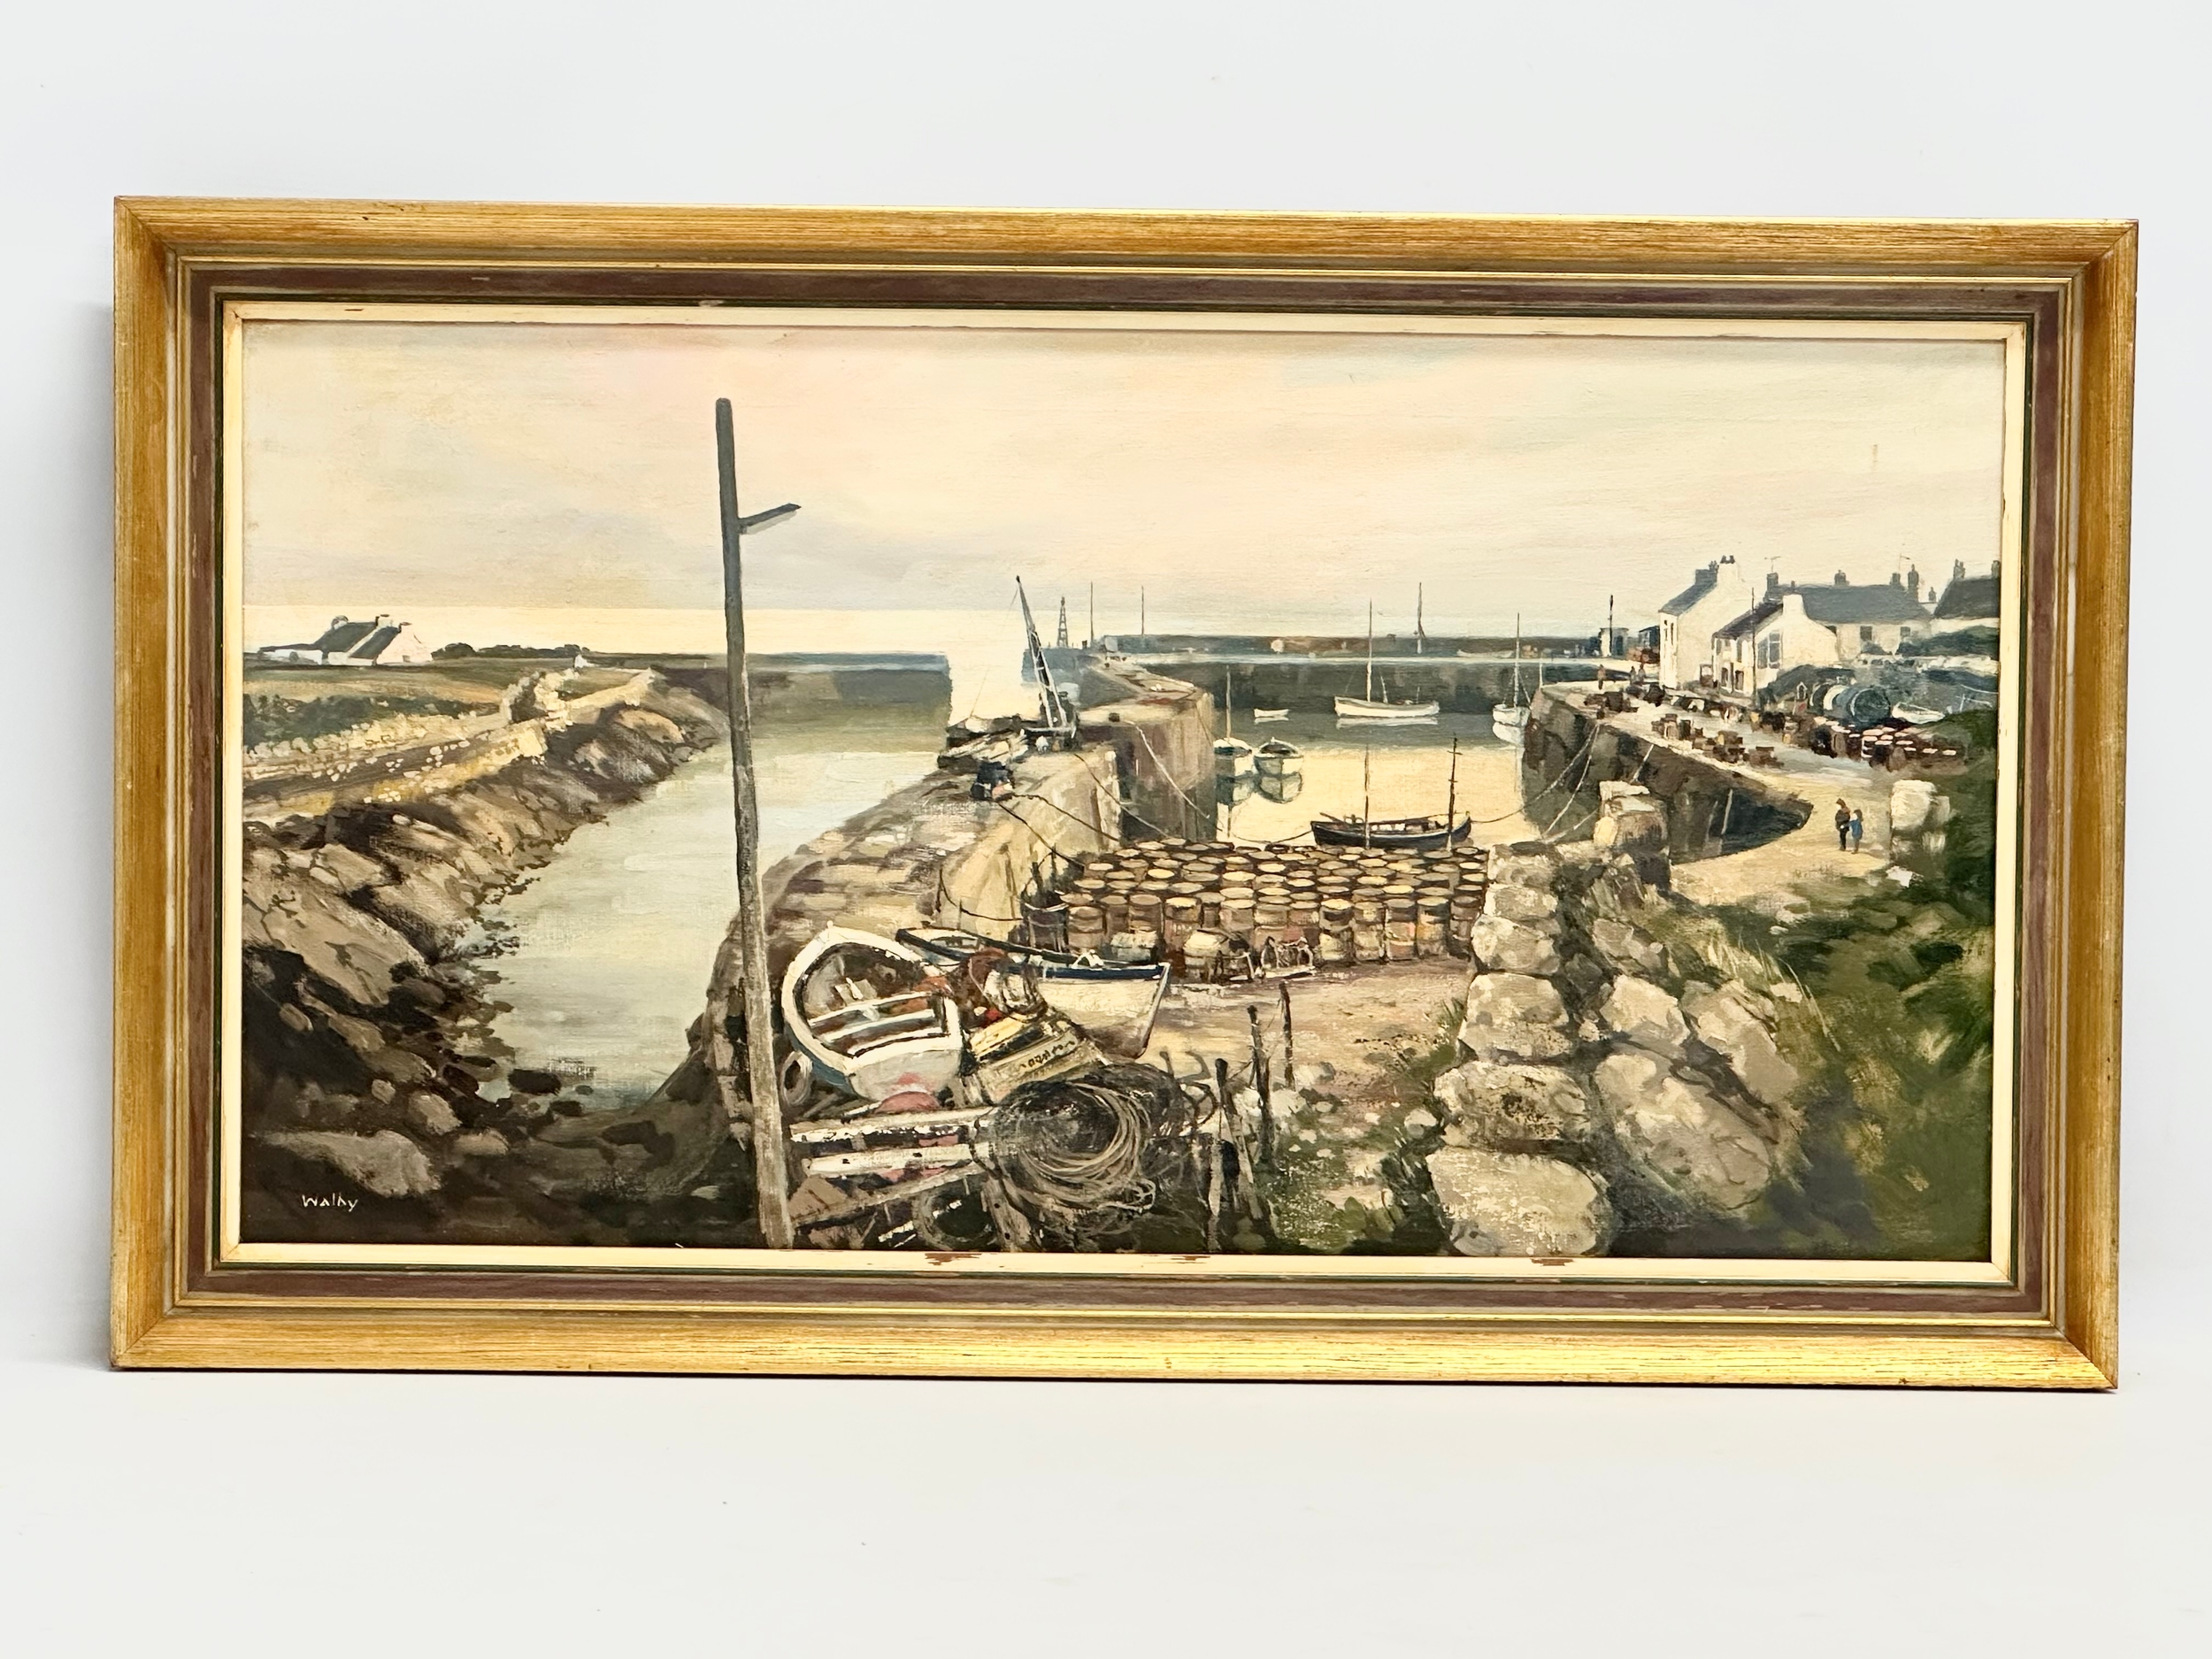 A large oil painting on canvas by Gerald Walby. Northern Irish Harbour. 75x40cm. Frame 85x49.5cm